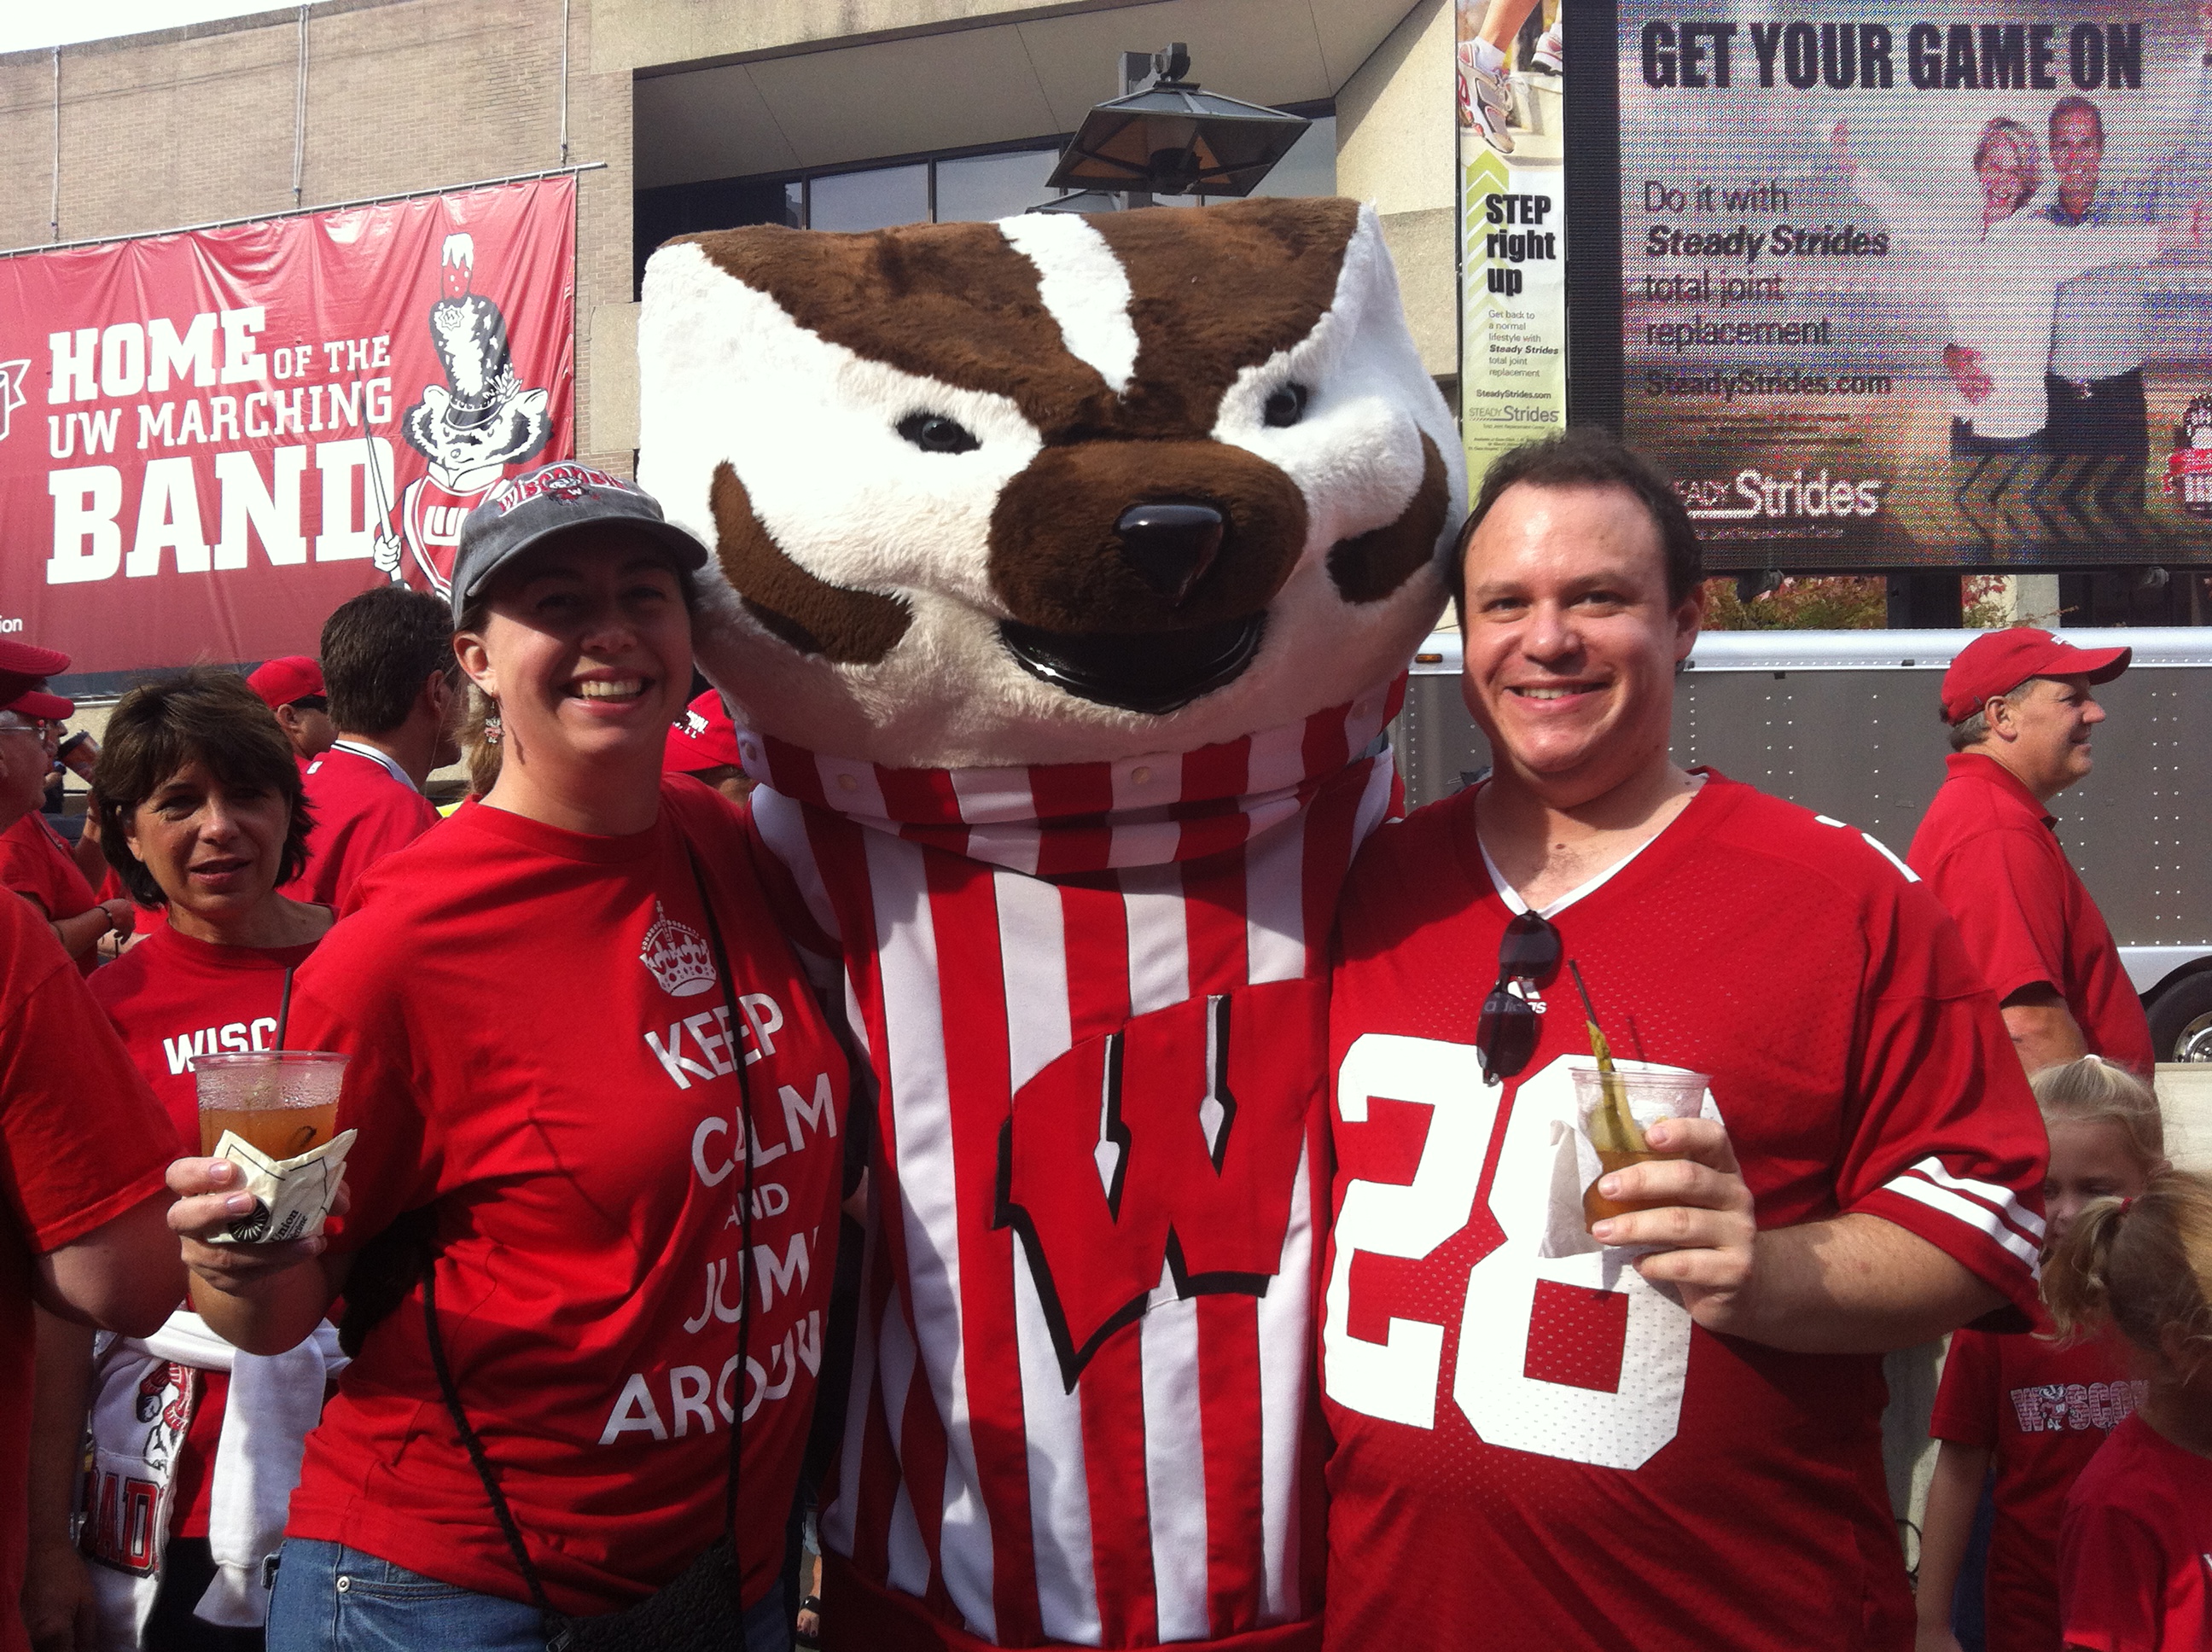 Ryan Billings and his wife Megan pose with the University of Wisconsin football mascot Bucky. Billings is a football fan with a special loyalty for the Greenbay Packers.